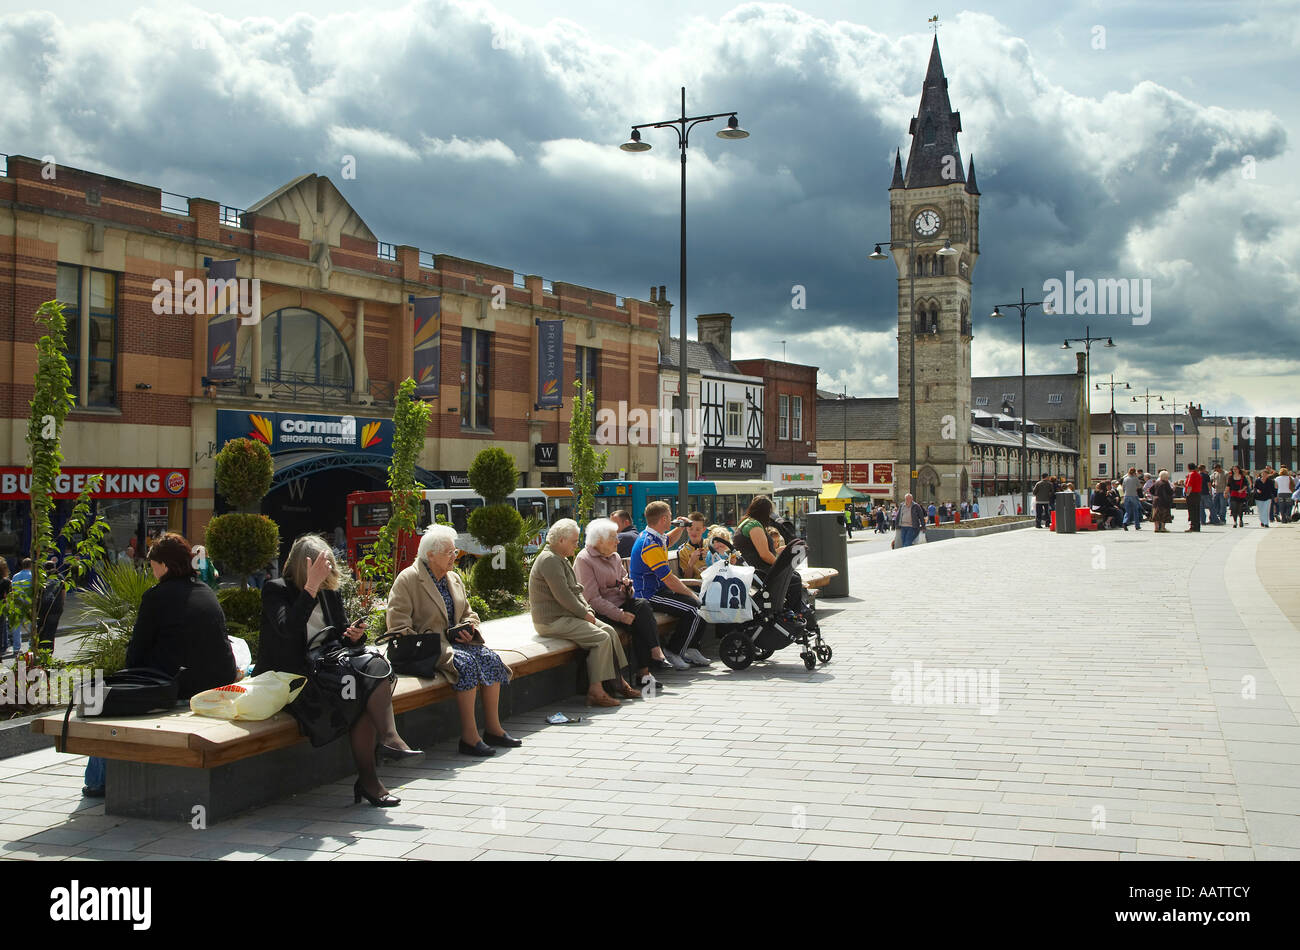 Darlington Town Centre in the Tees Valley North East England Stock Photo